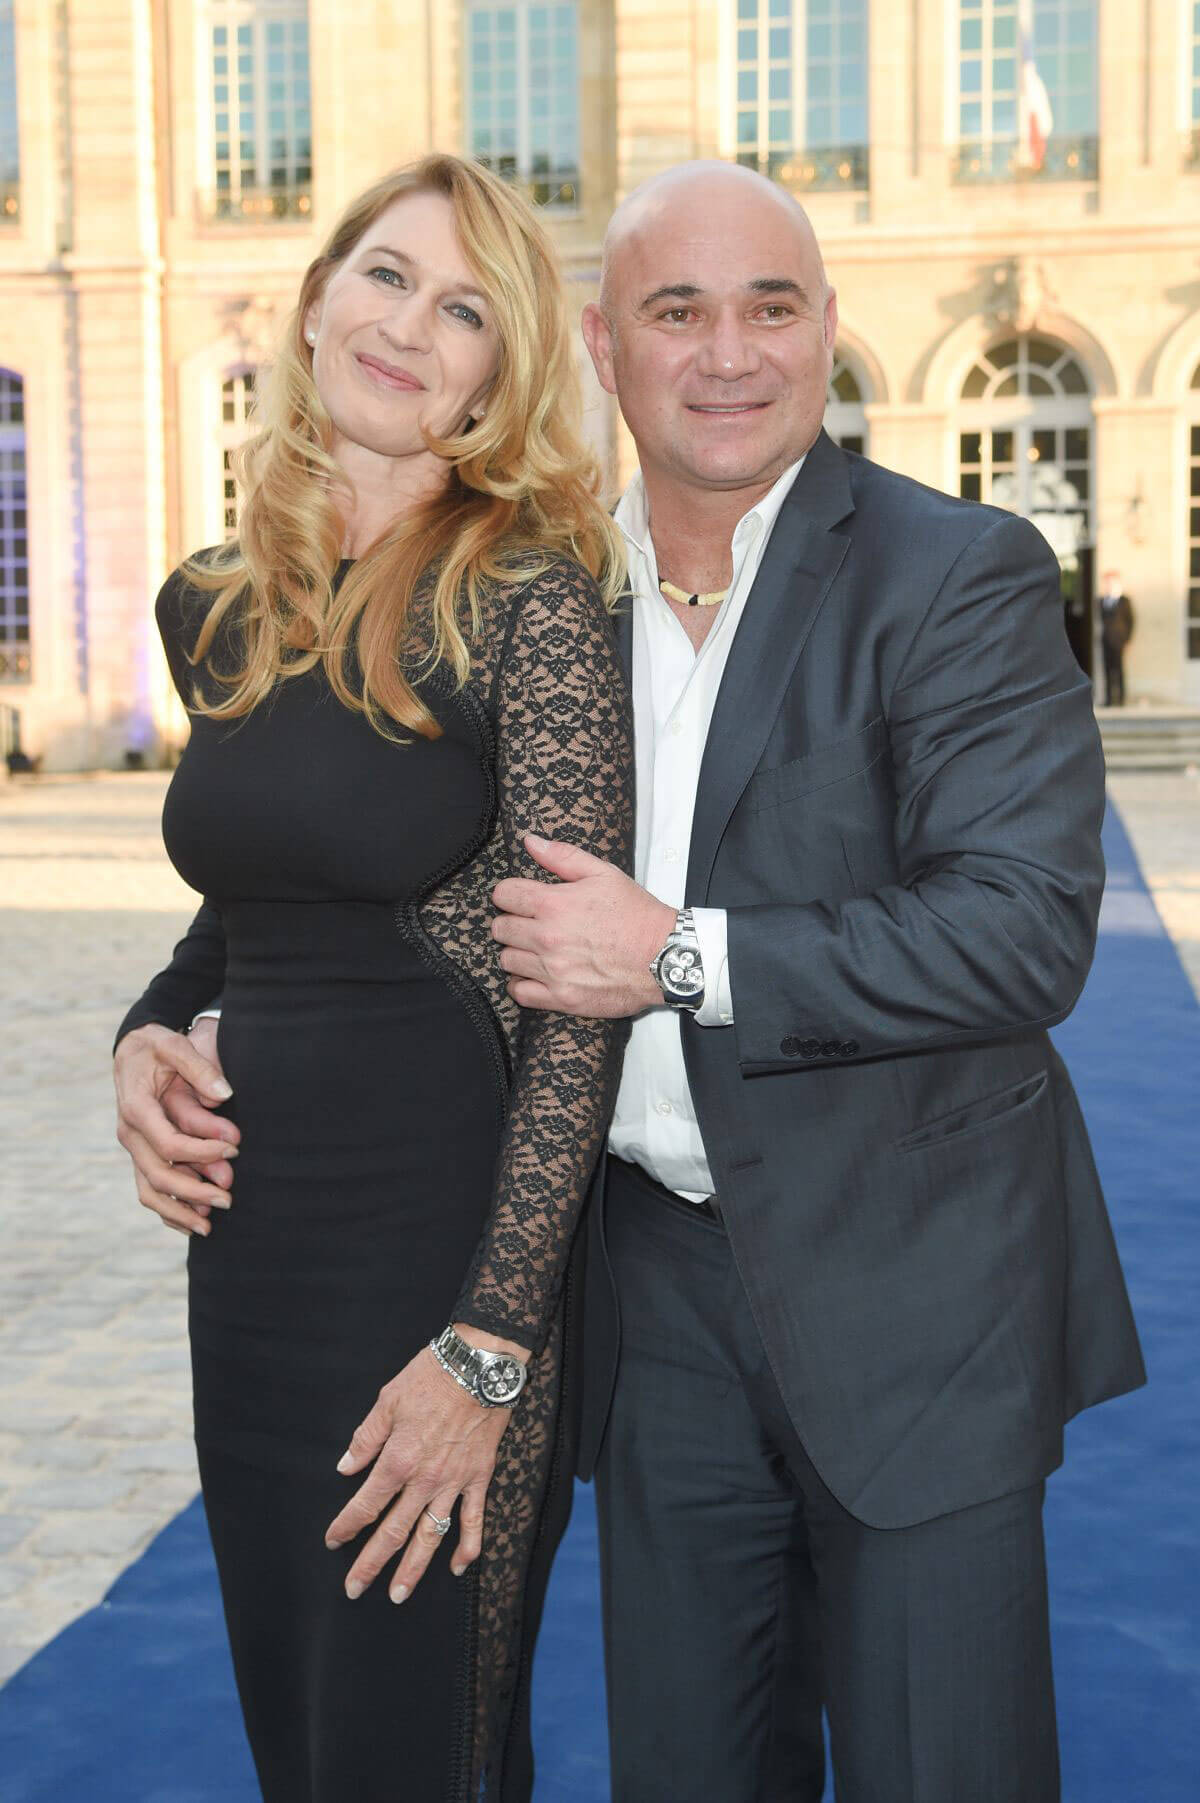 Steffi Graf and Andre Agassi at Longines Charity Gala in Paris 2018/06/02